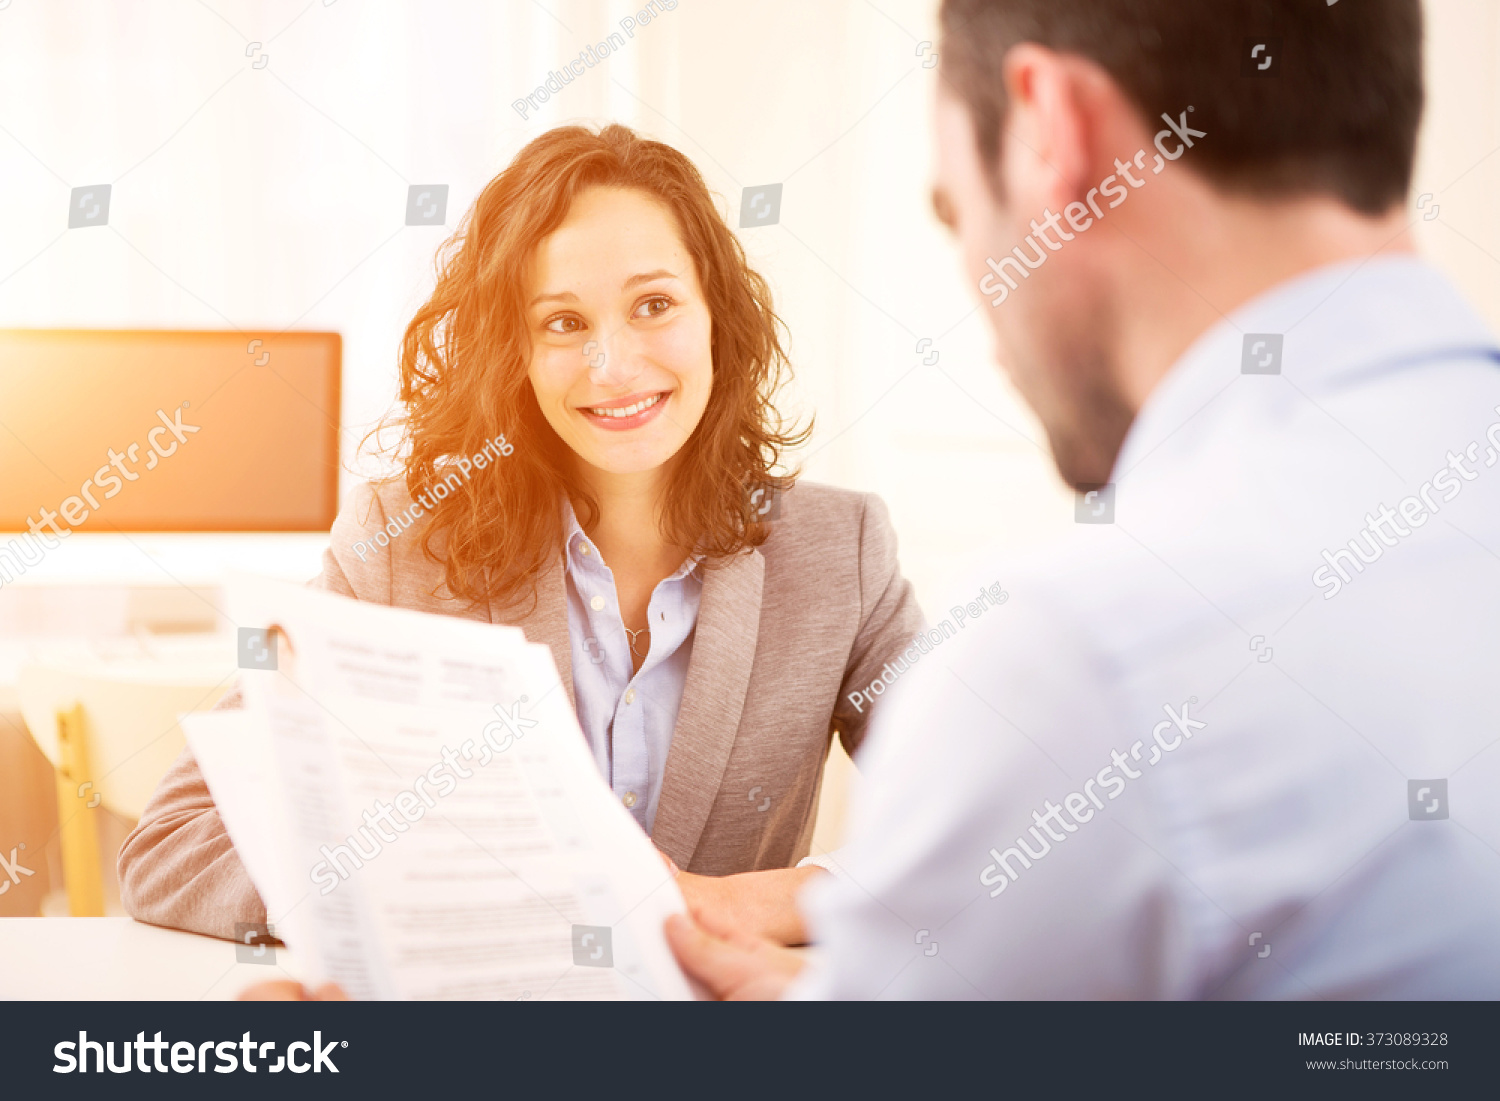 Young attractive woman during job interview #373089328